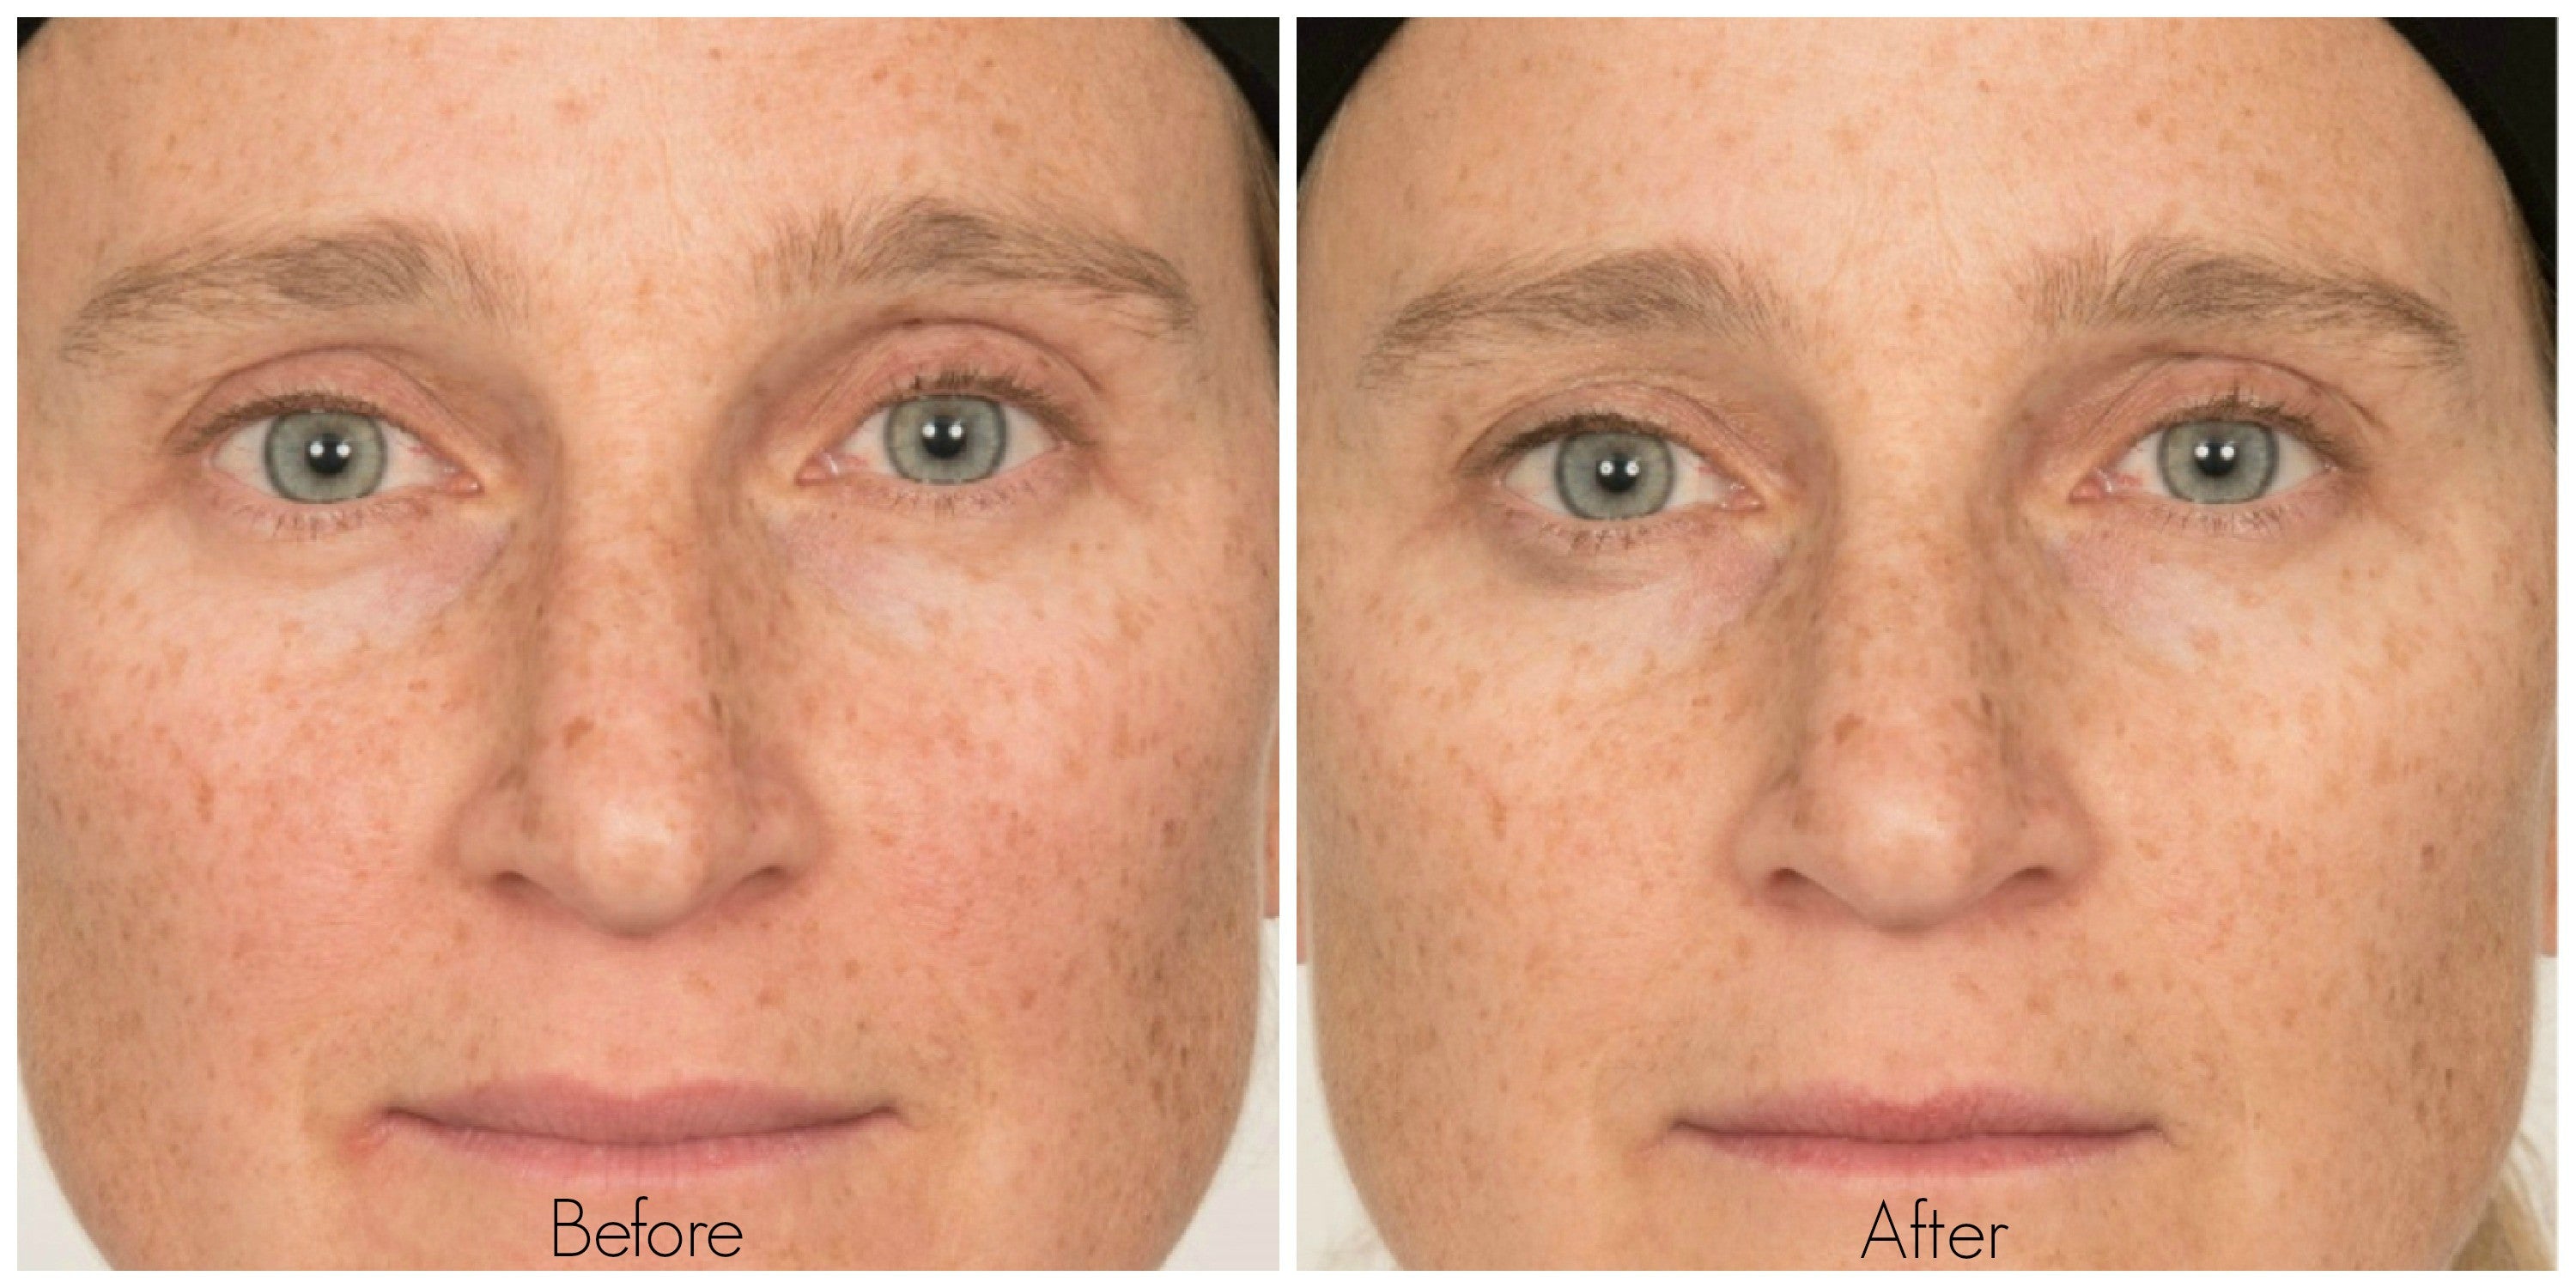 Skin Vitamin C Before And After - NaturalSkins